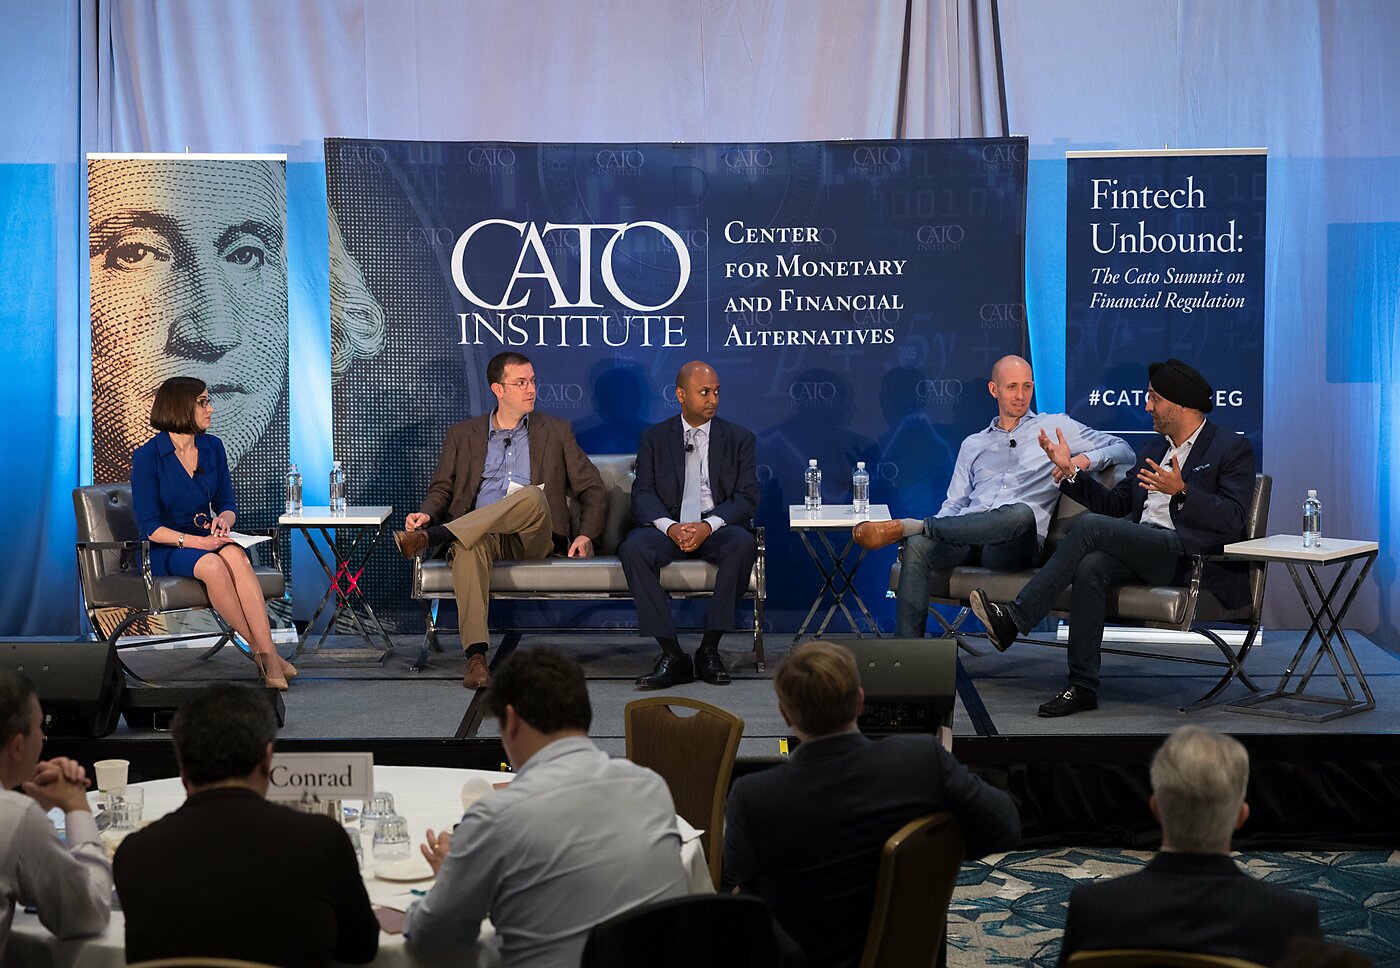 Fintech, cato events, fintech unbound, payments, cryptocurrencies, banking